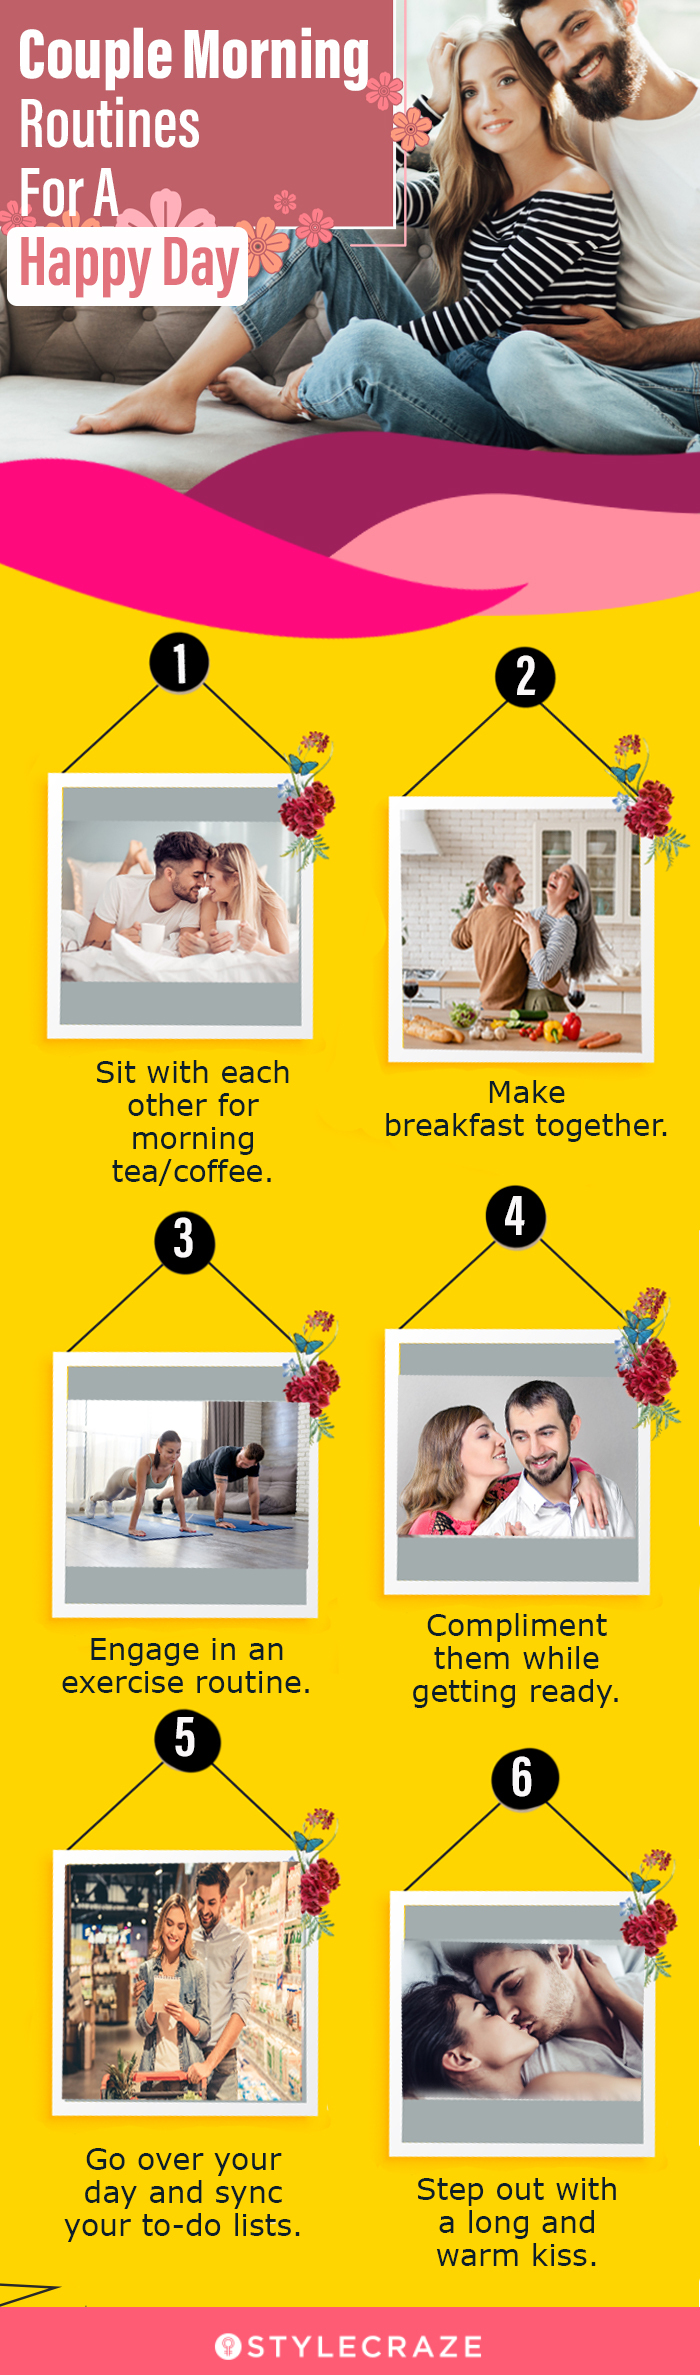 couple morning routines for a happy day [infographic]